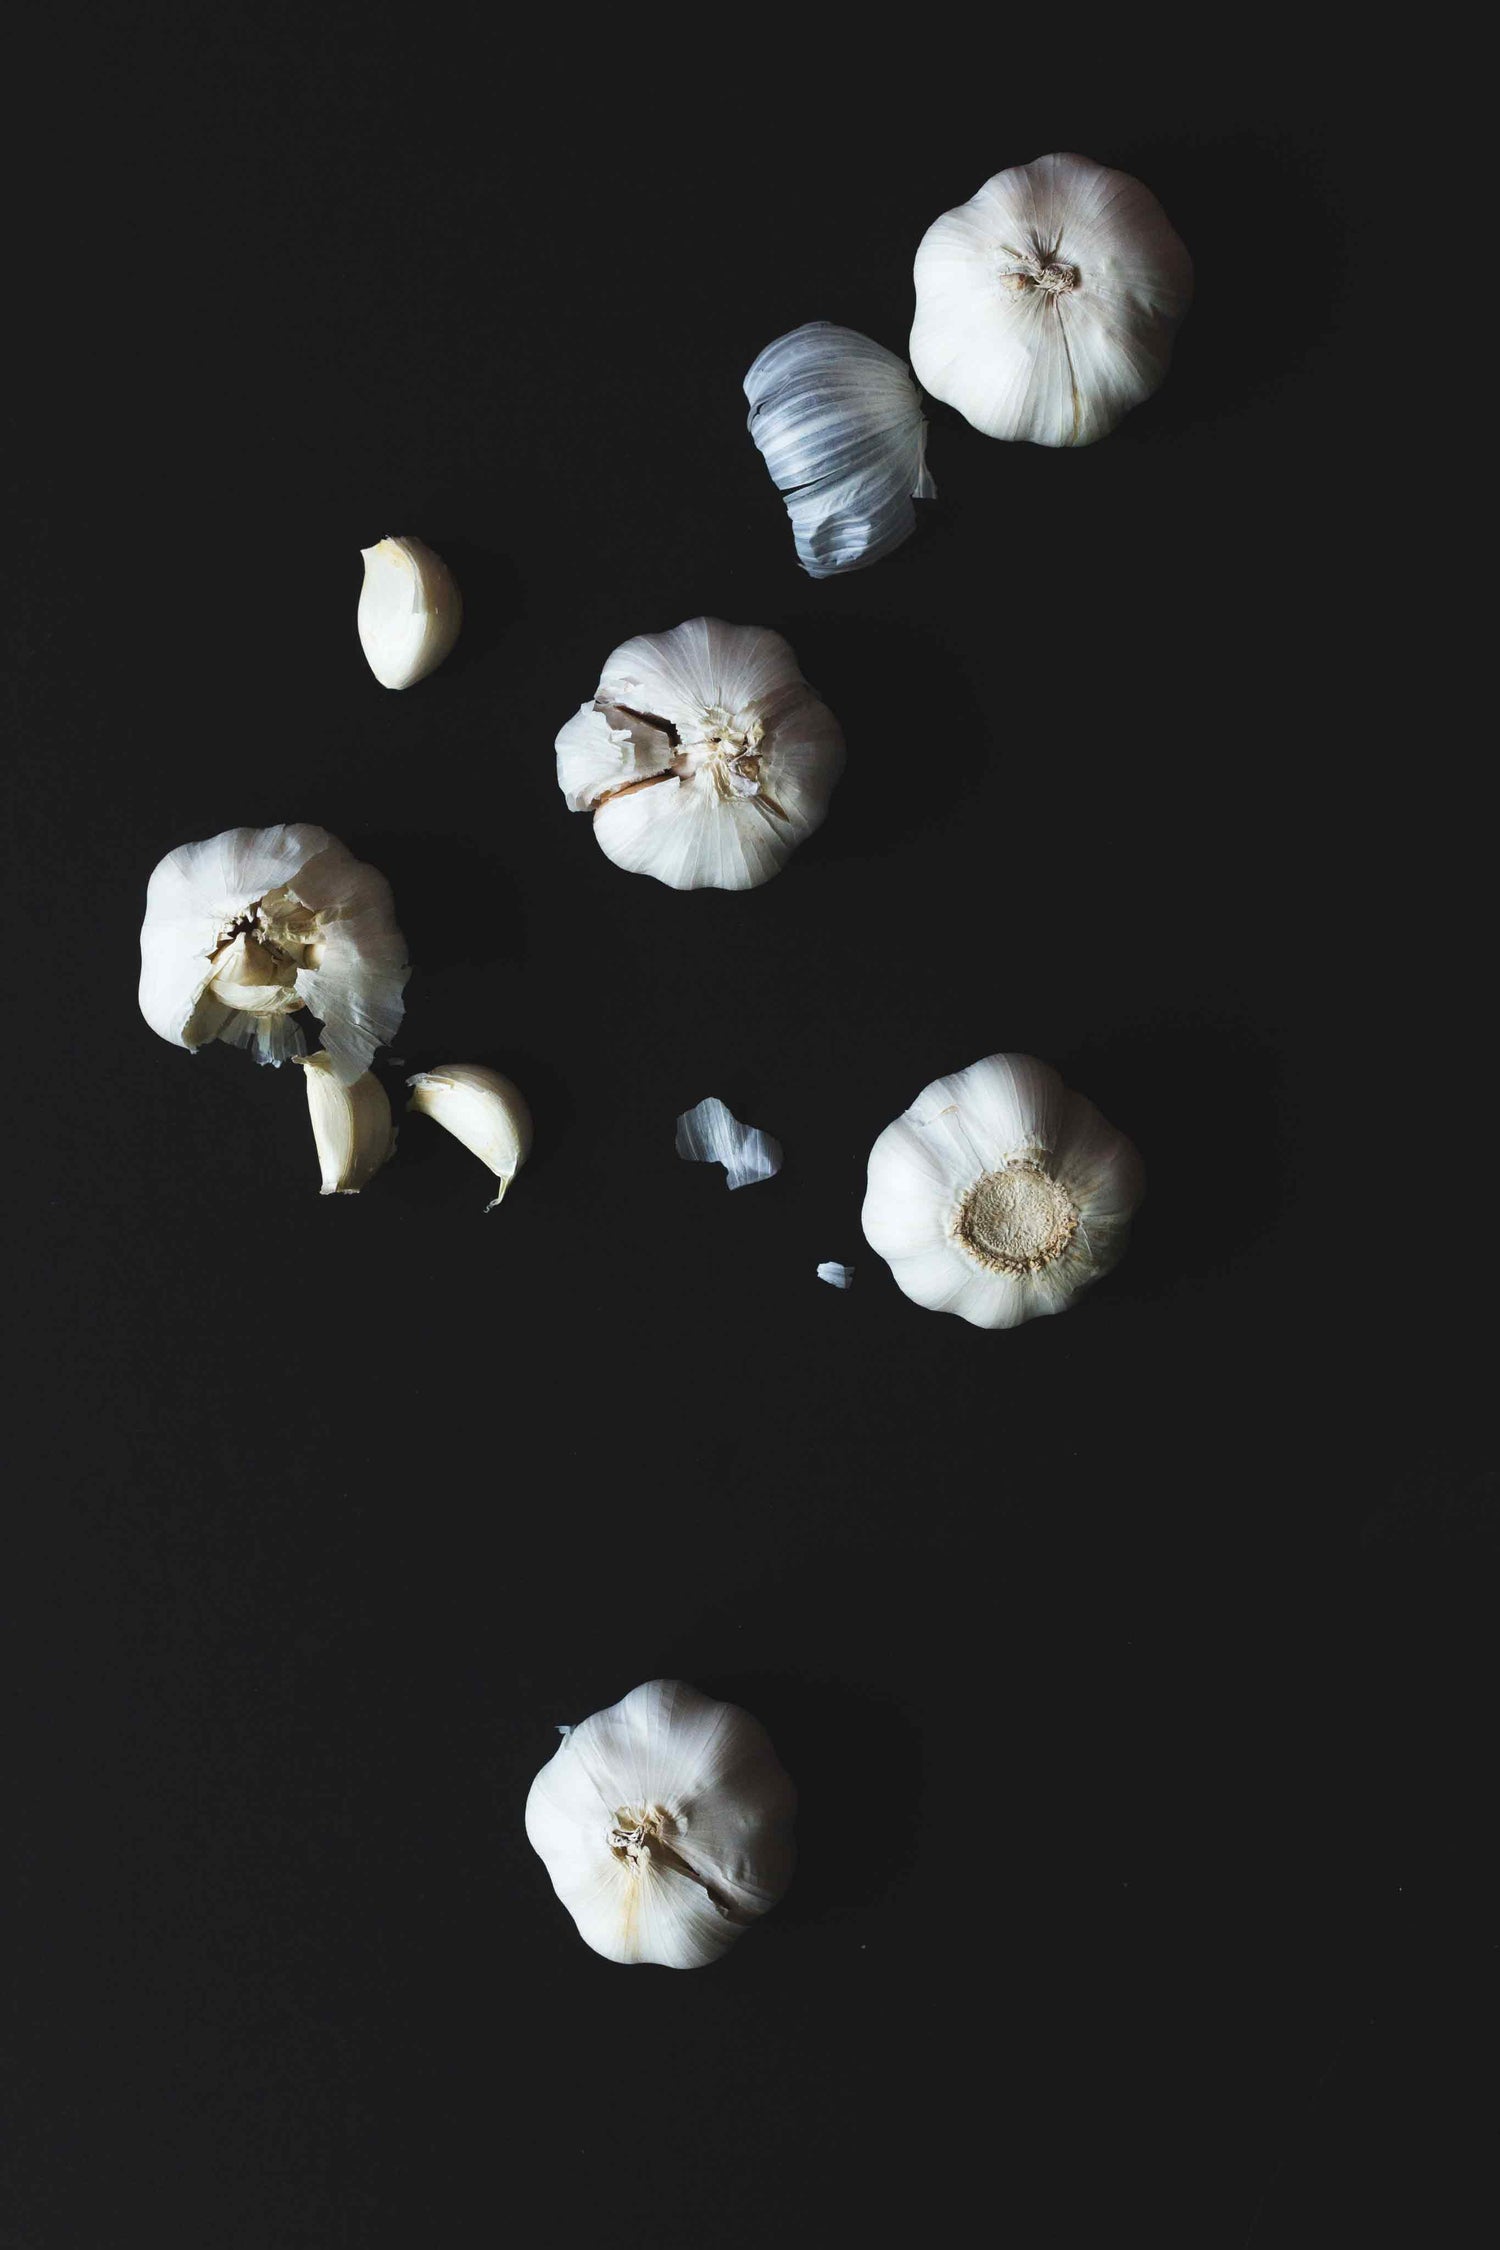 Cloves of garlic falling and bursting open, with bulbs spilling out, against a pitch black background.